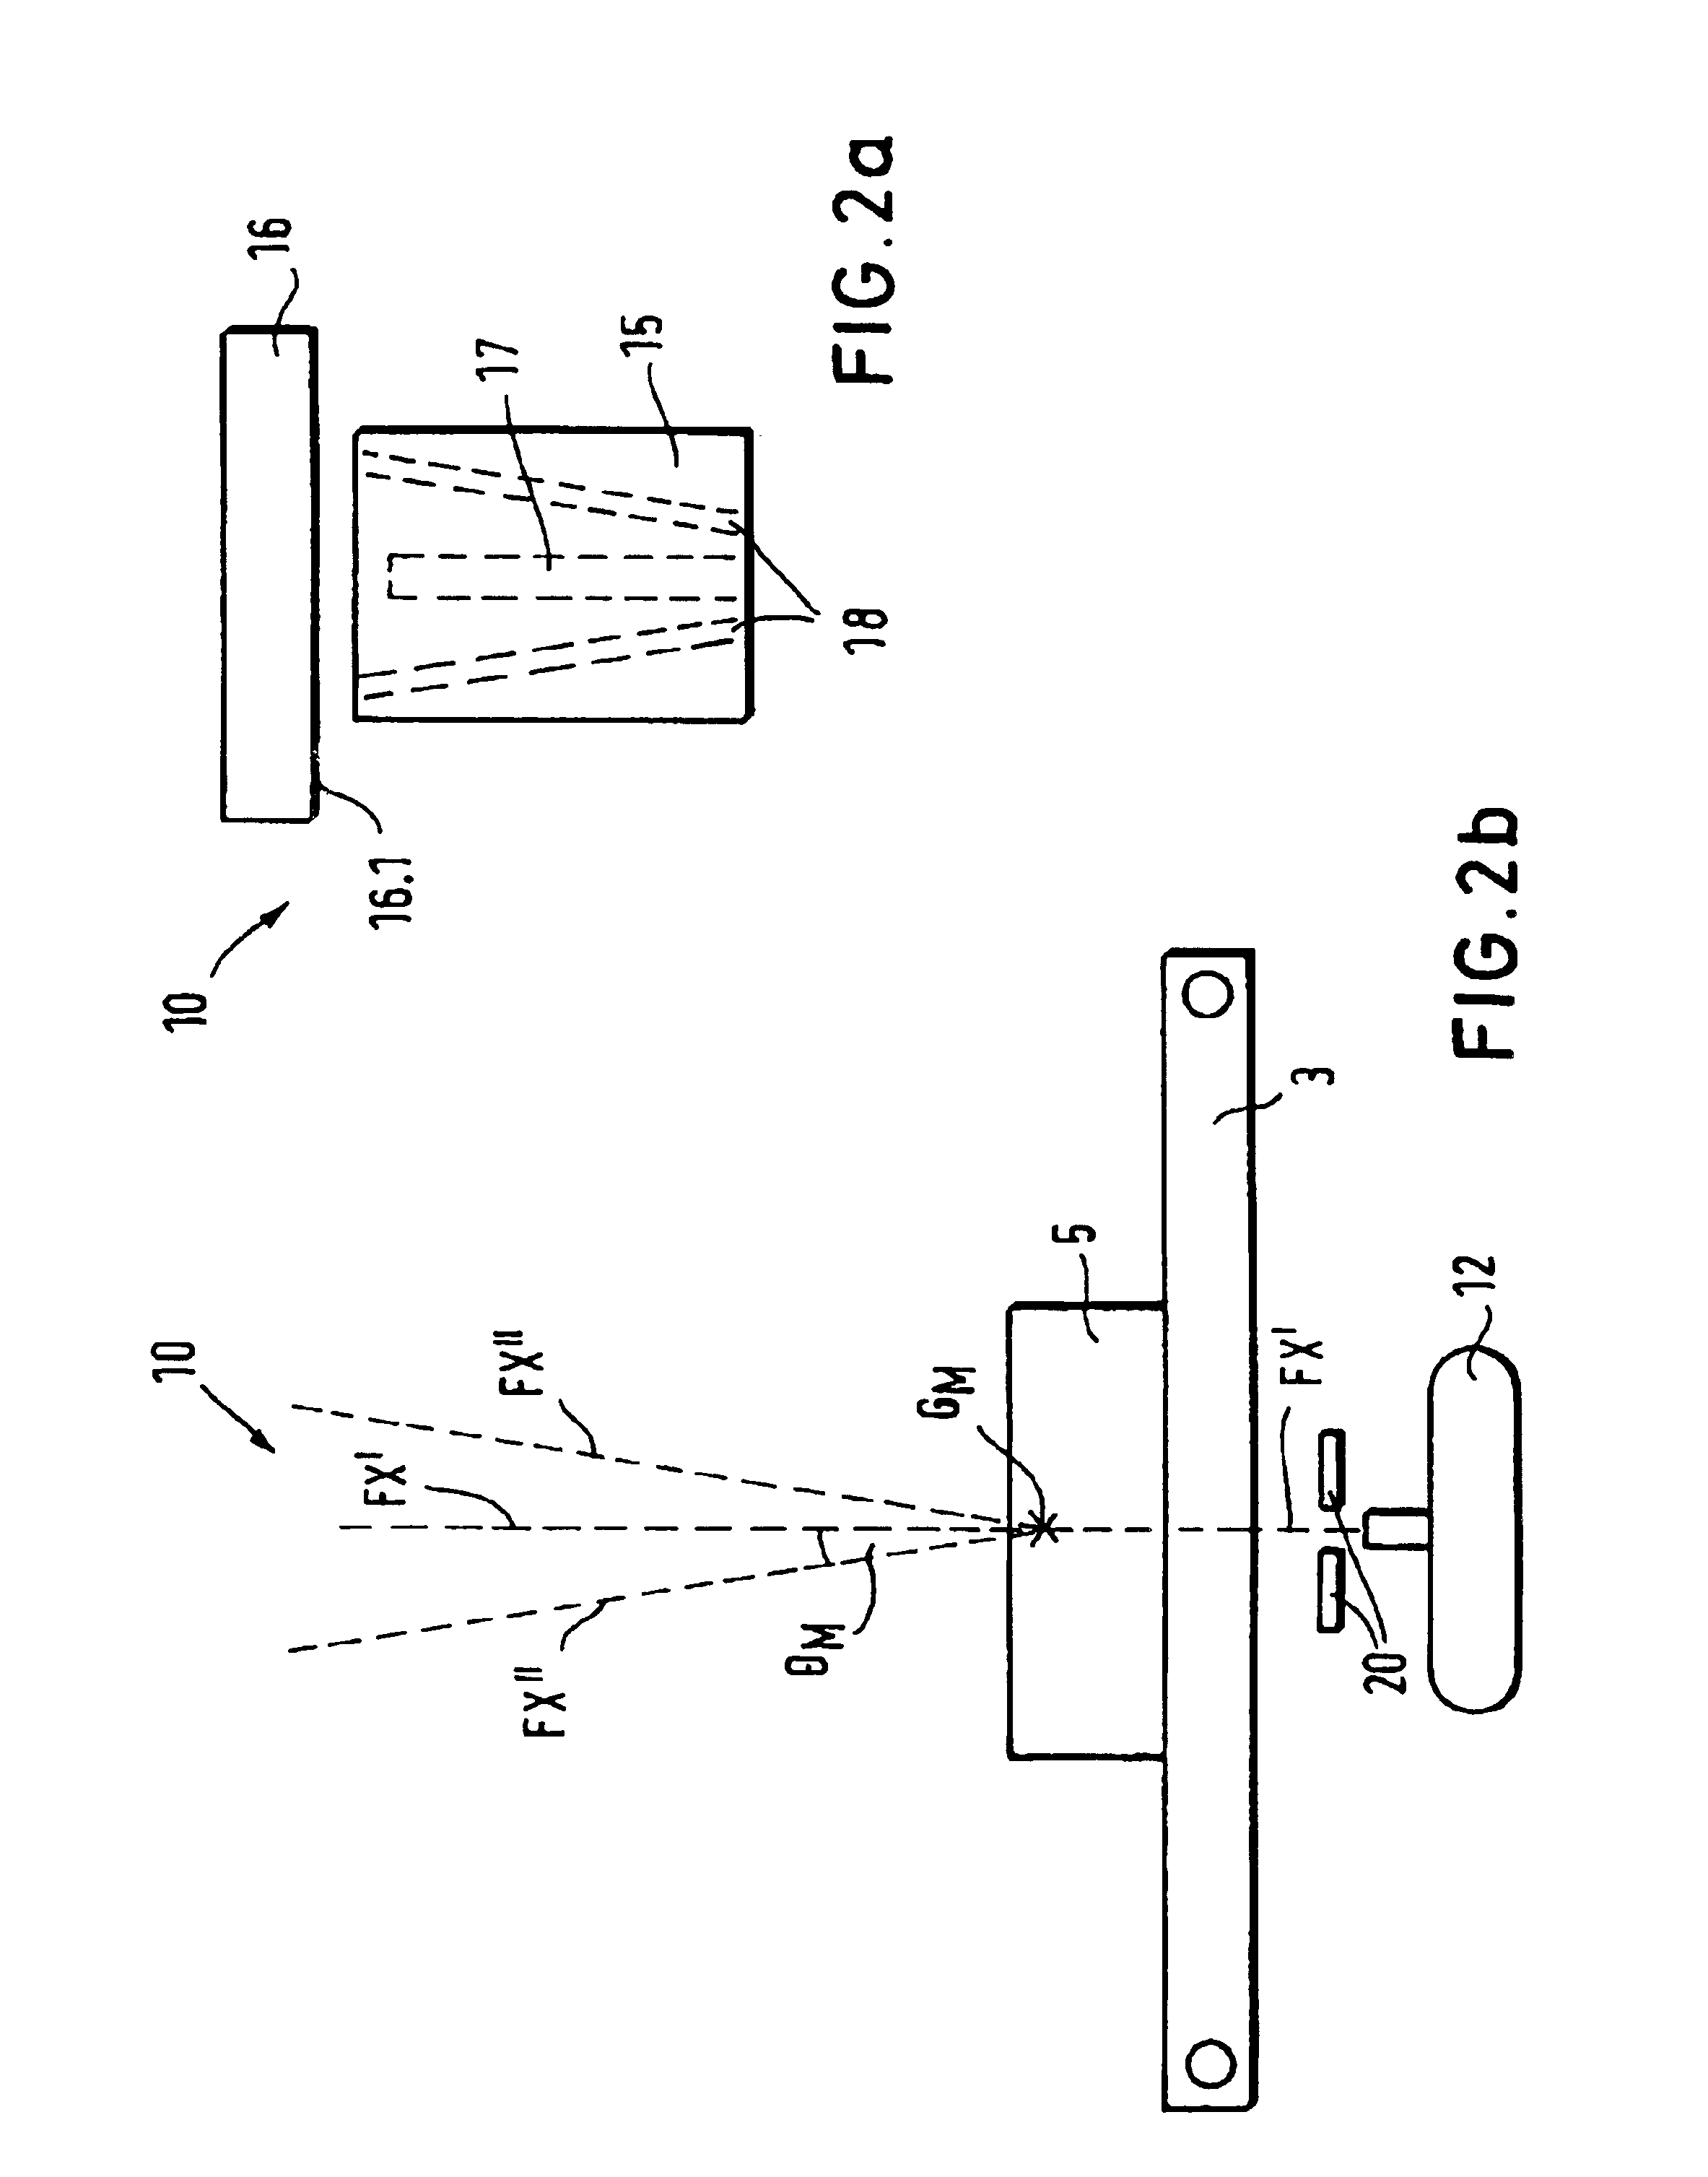 Apparatus and method for detecting items in objects